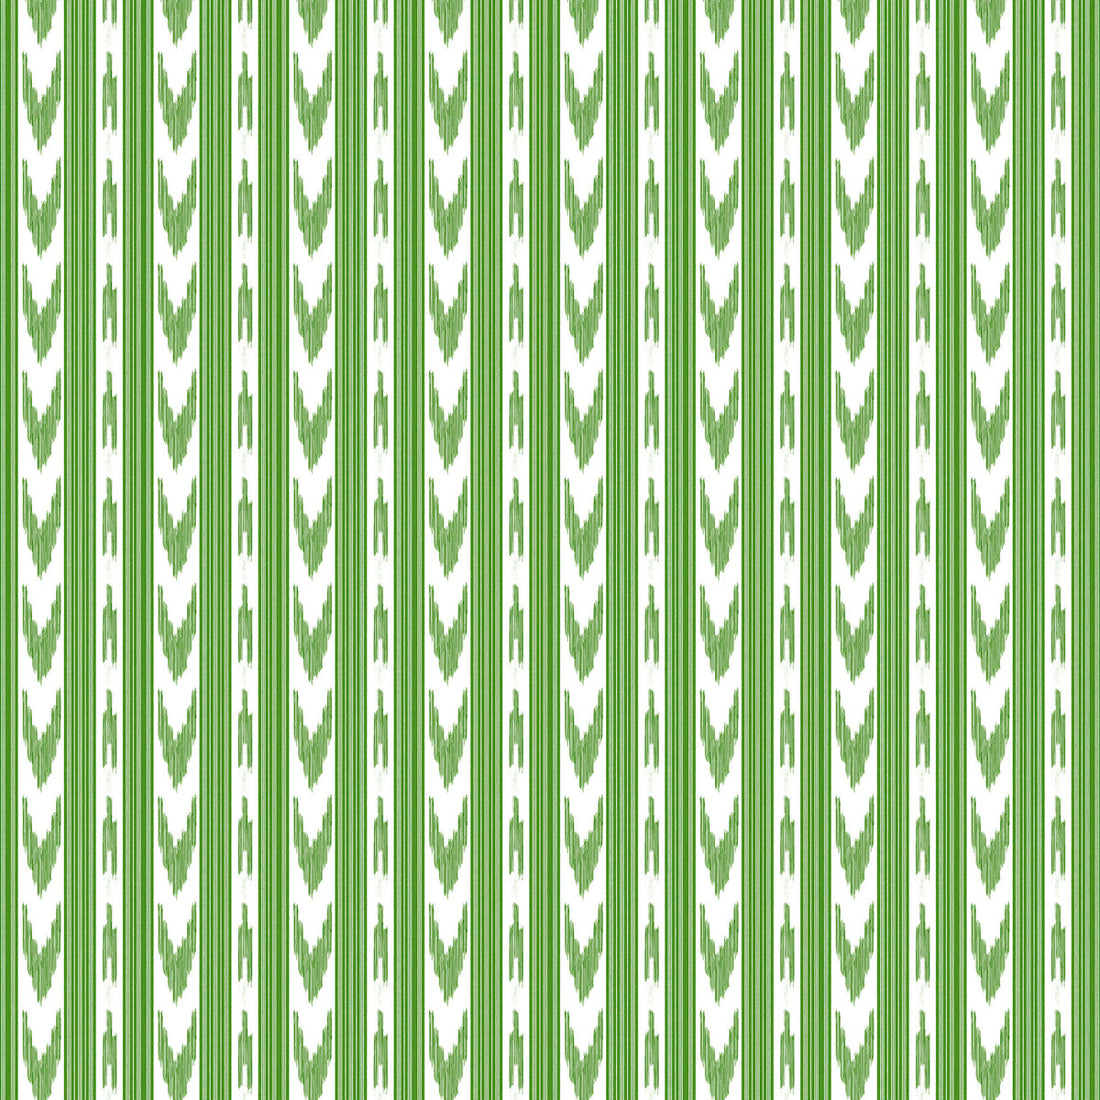 Cala Pi fabric in verde color - pattern GDT5679.002.0 - by Gaston y Daniela in the Gaston Maiorica collection